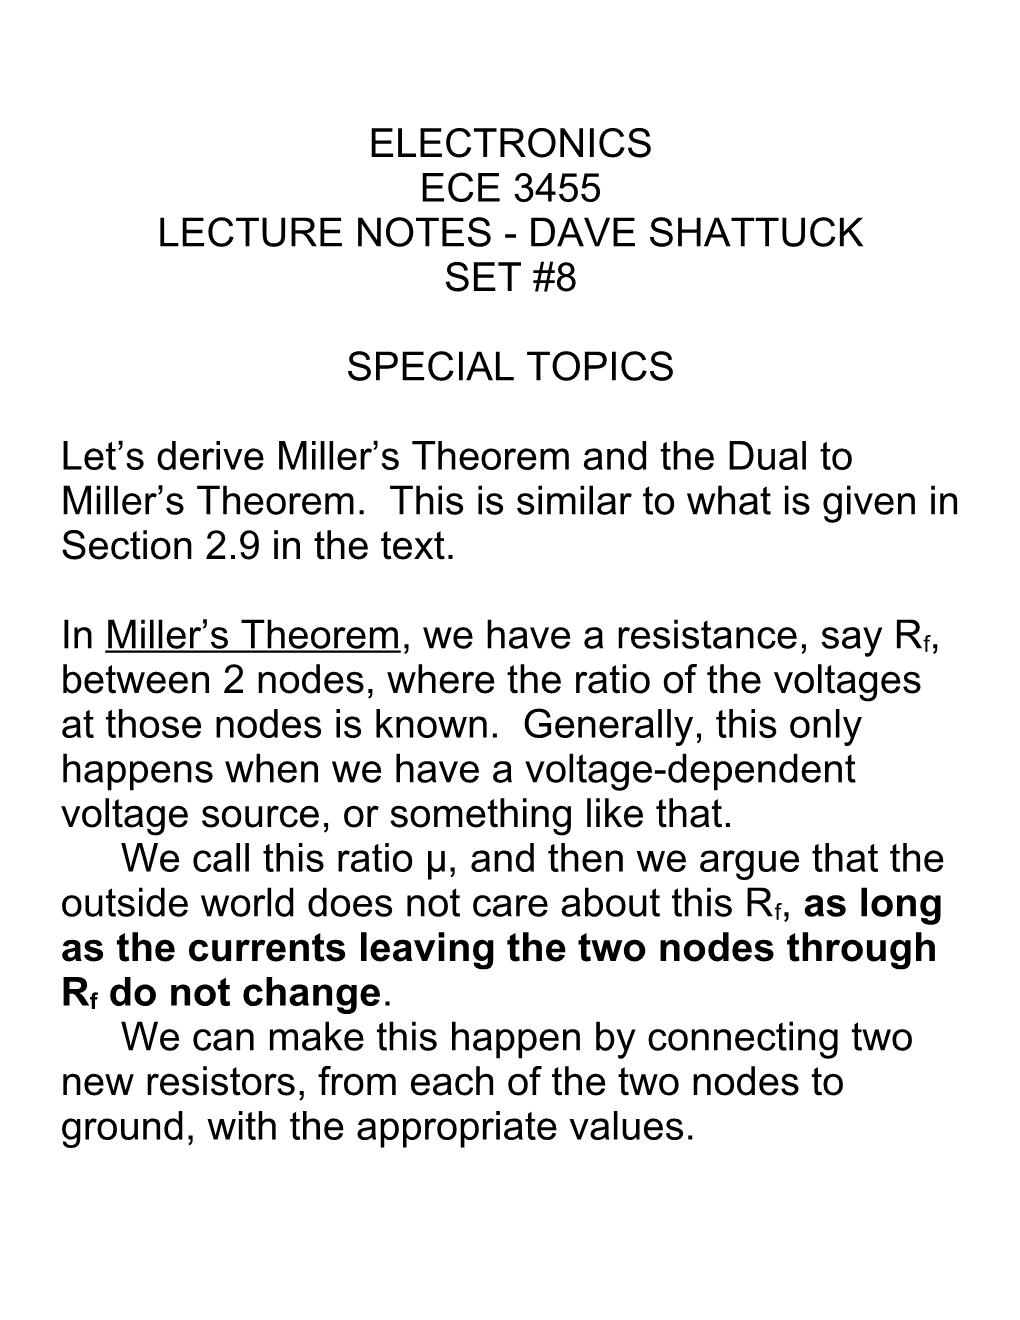 Lecture Notes - Dave Shattuck